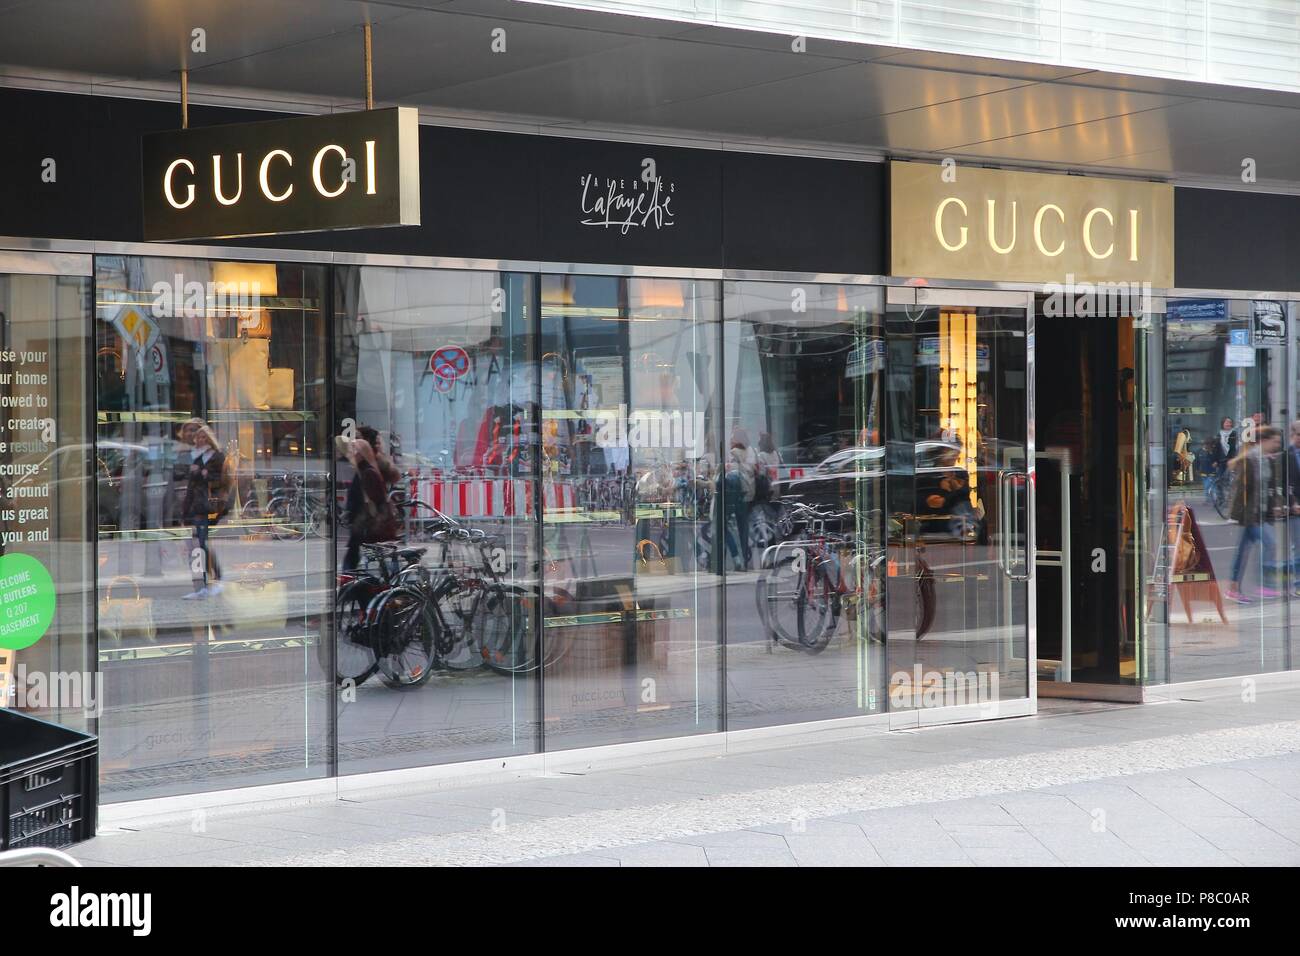 BERLIN, GERMANY - AUGUST 26, 2014: Gucci store windows in Berlin. Luxury  brand Gucci exists since 1921 and was valued at 12.1 billion USD in 2013  Stock Photo - Alamy